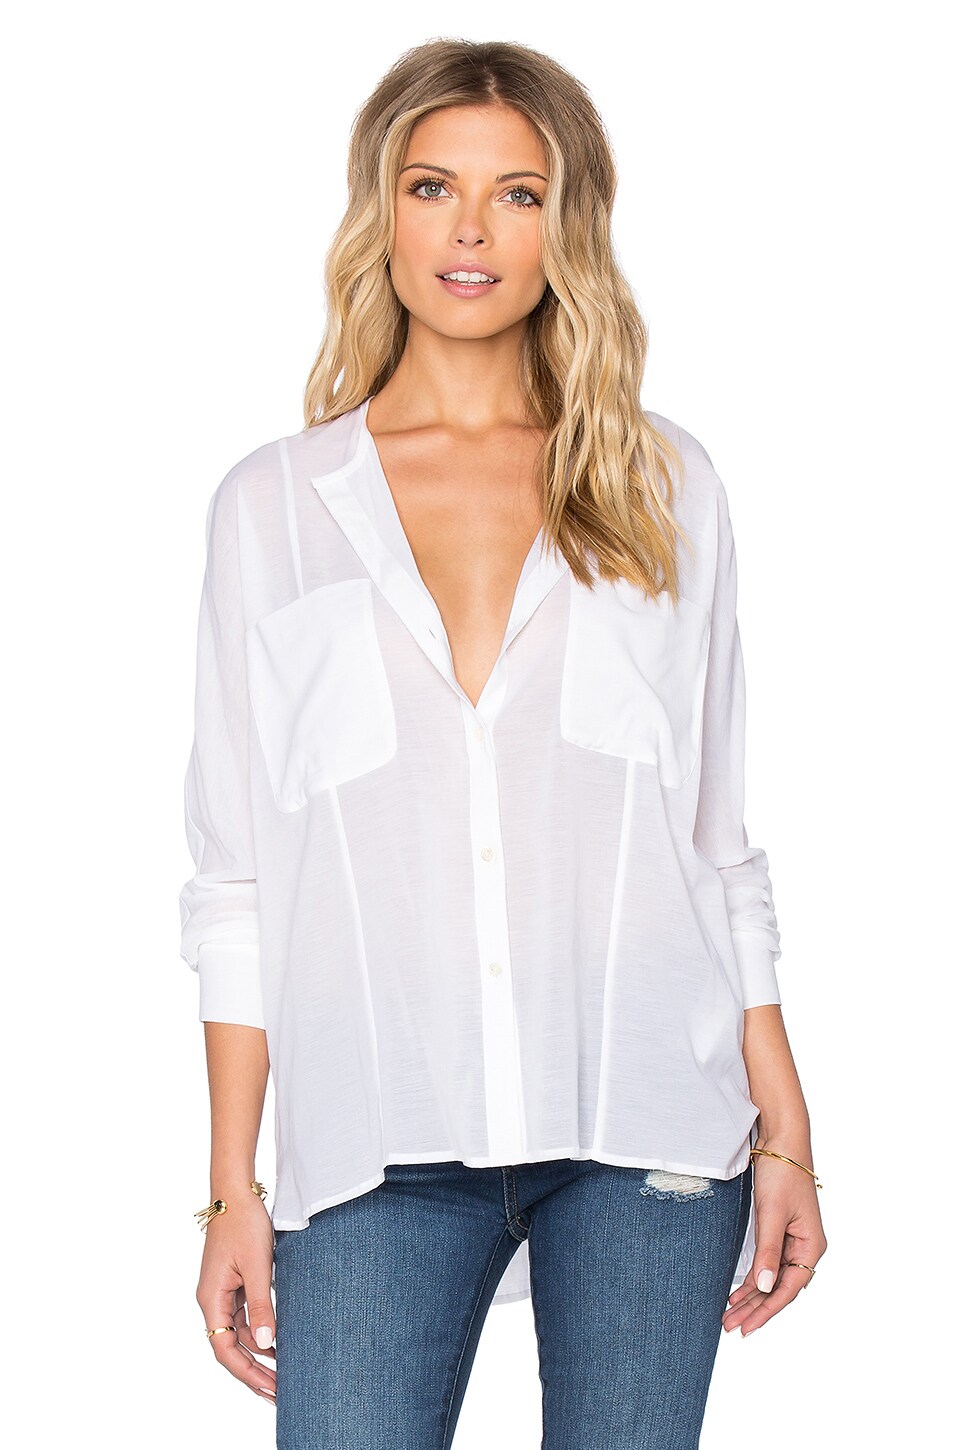 James Perse Oversized Chiffon Stretch Button Up in White | REVOLVE